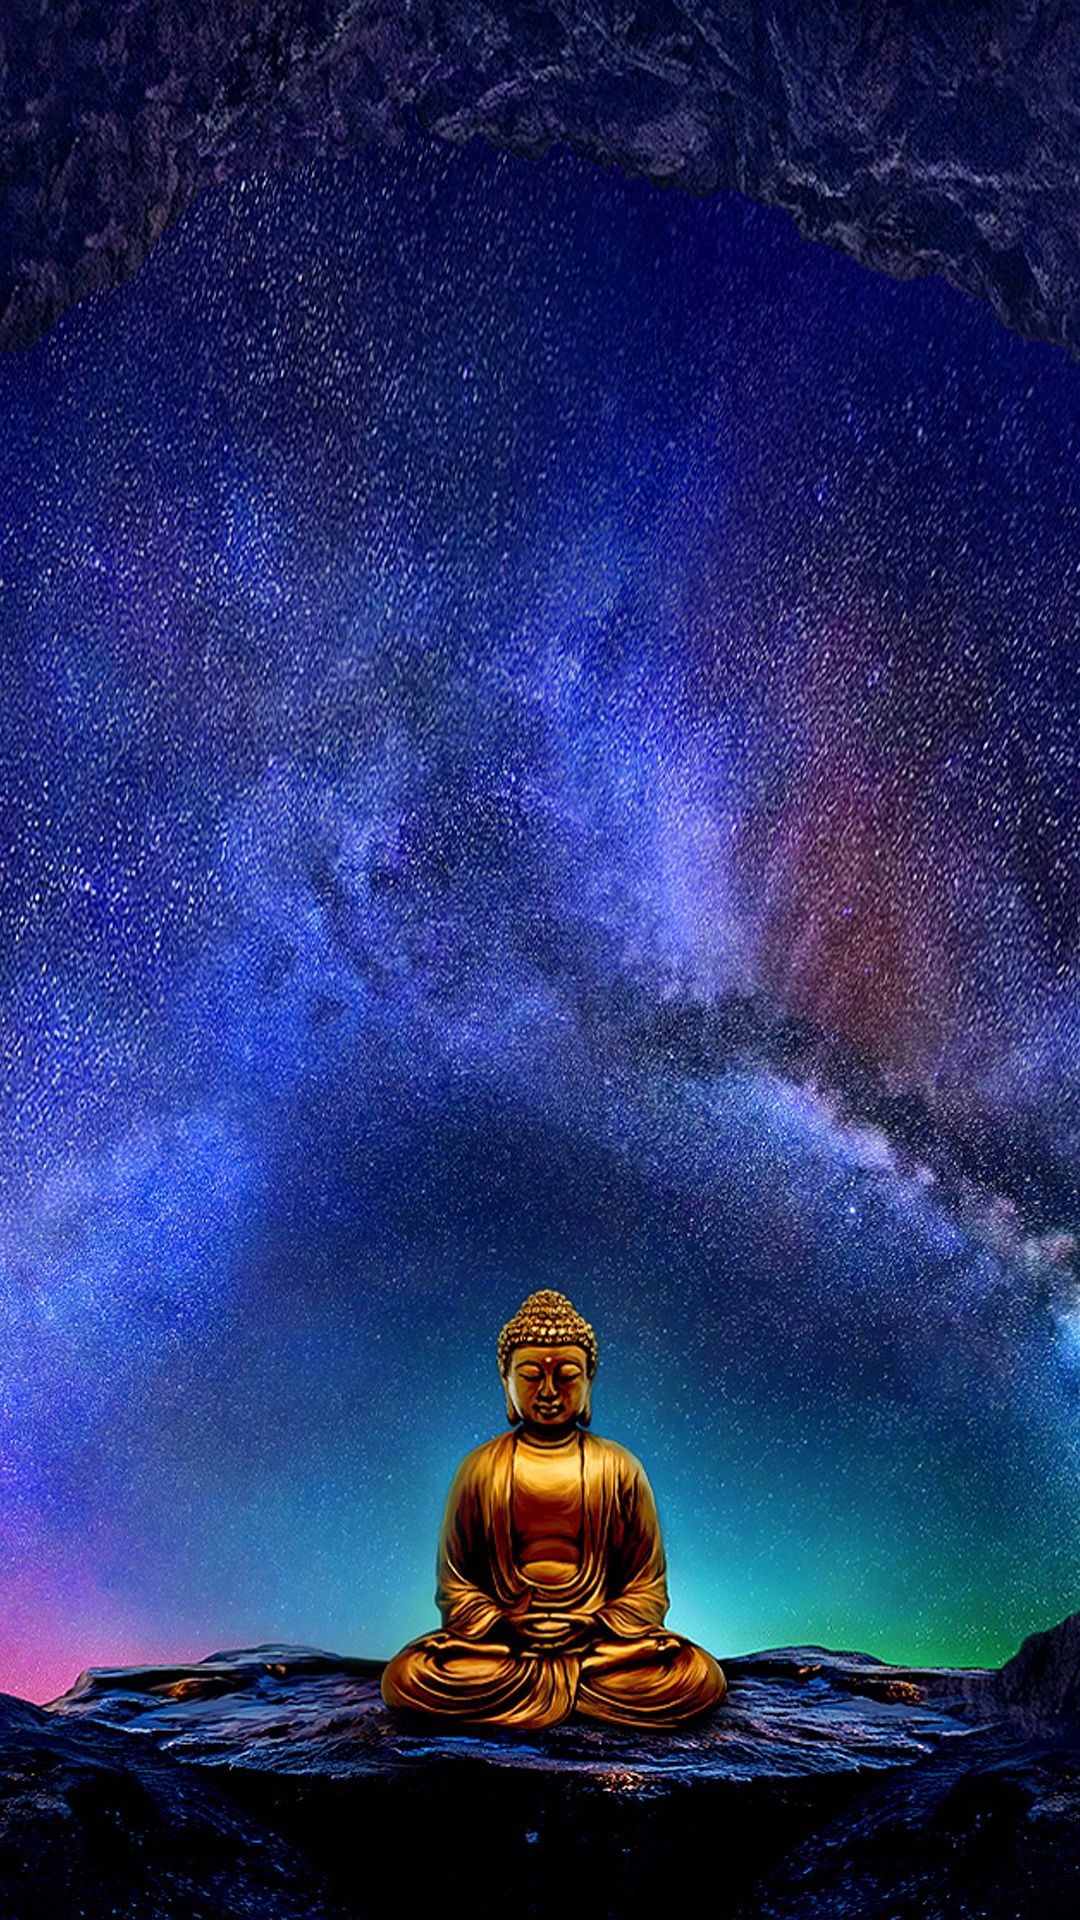 1080x1920, Buddha Wallpaper For Mobile Devices Artwork - Buddha Wallpaper Hd - HD Wallpaper 